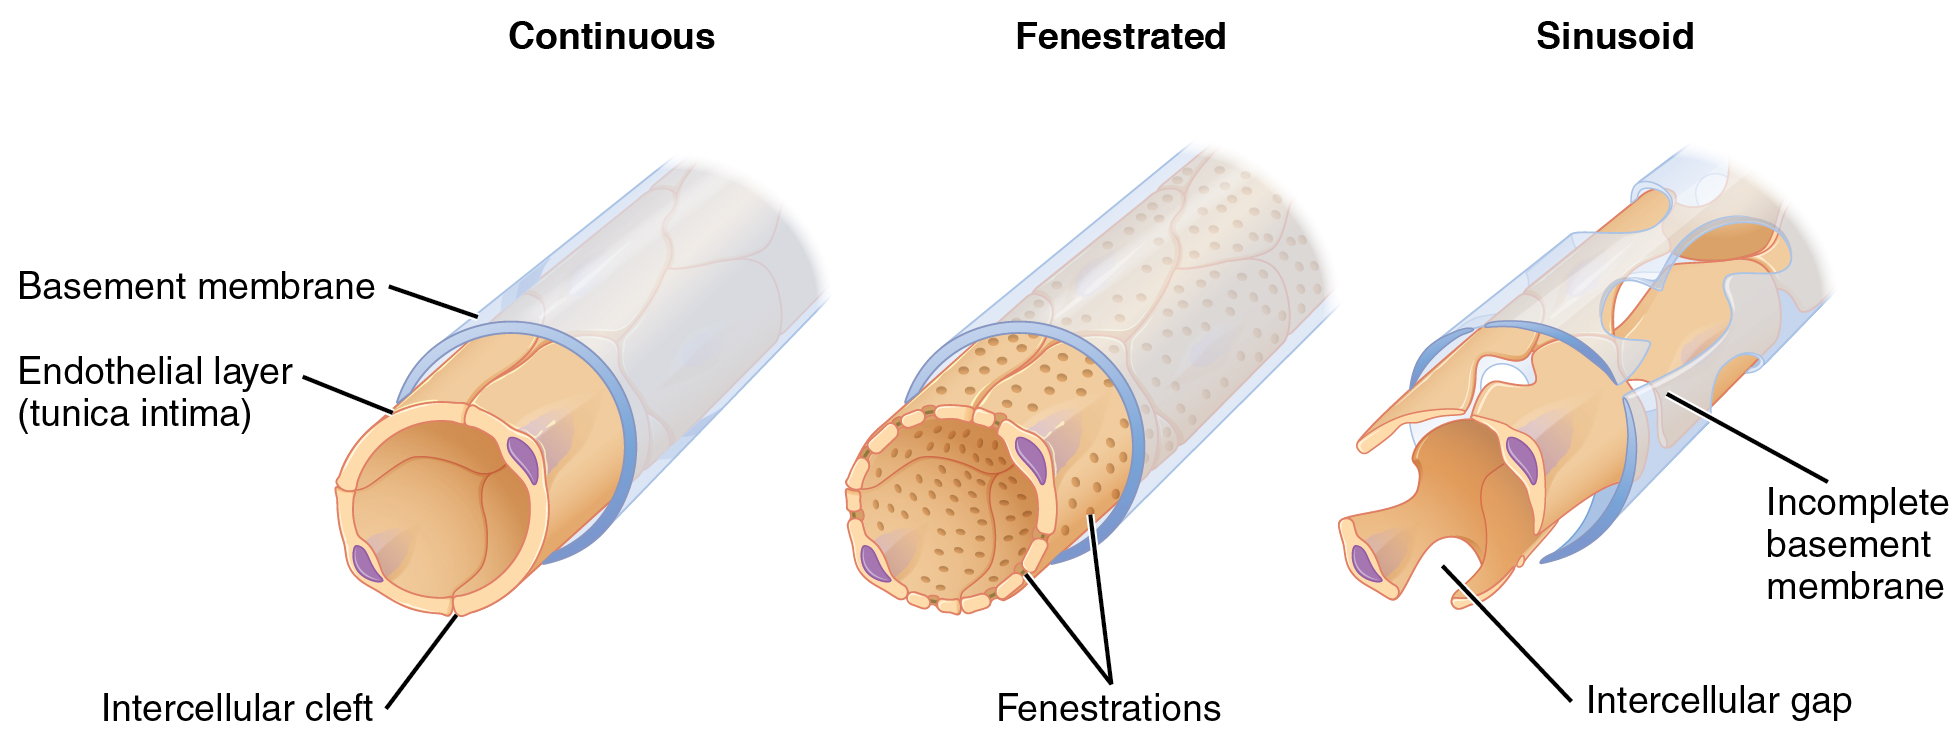 The left panel shows the structure of a continuous capillary, the middle panel shows a fenestrated capillary, and the right panel shows a sinusoid capillary.